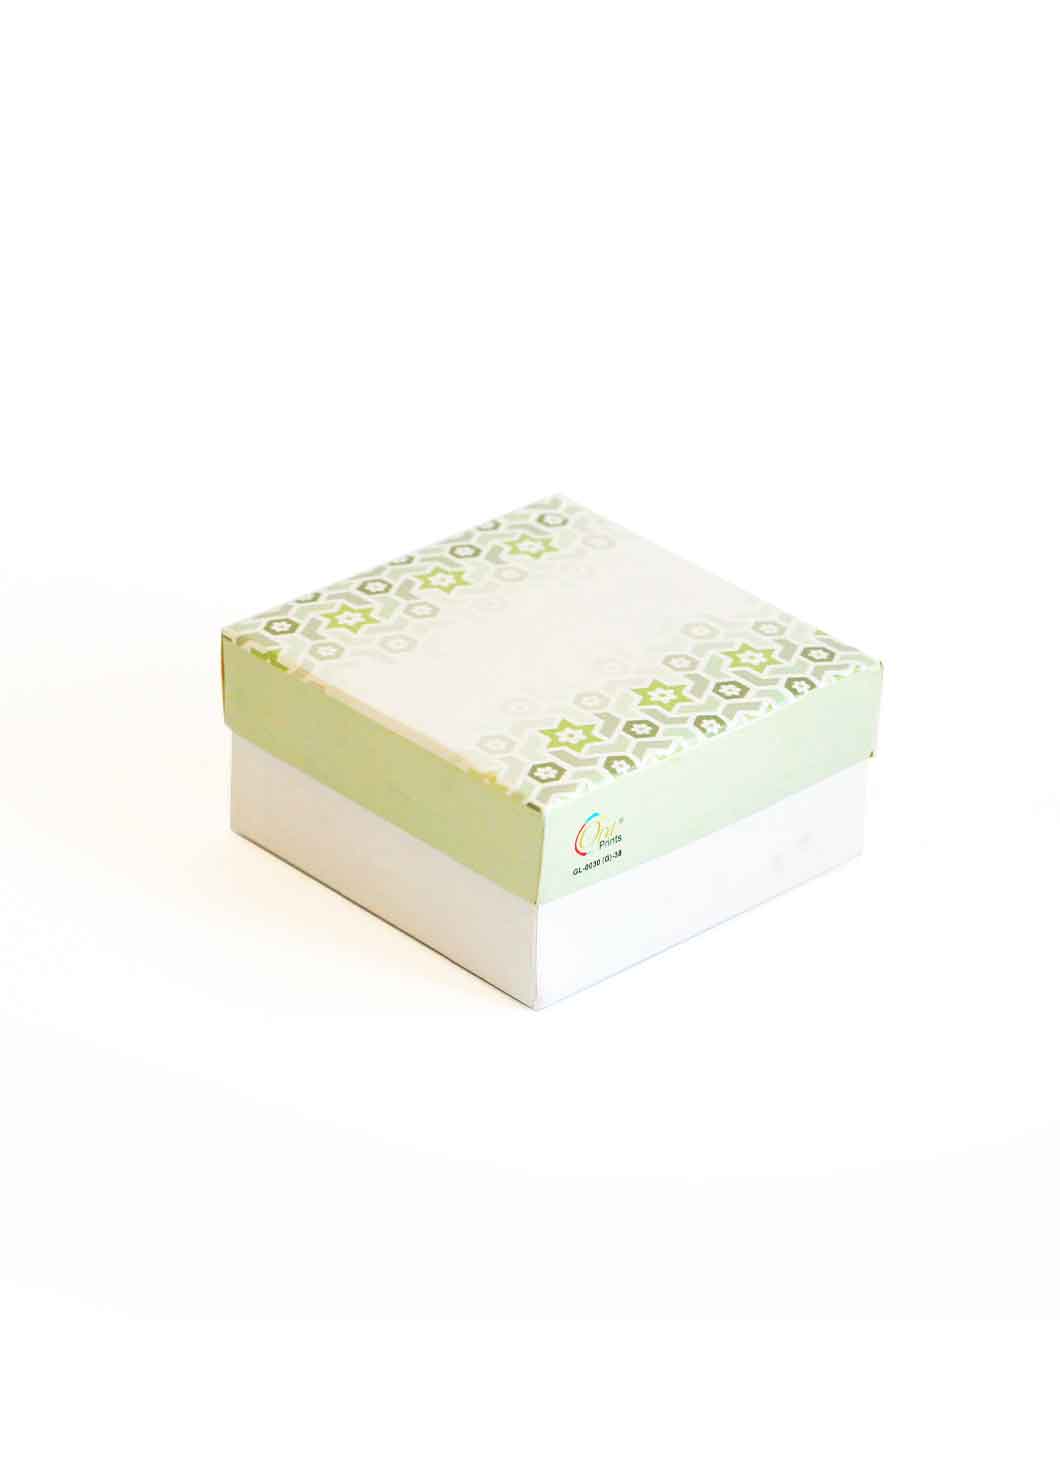 Green and White Design Box for Packing